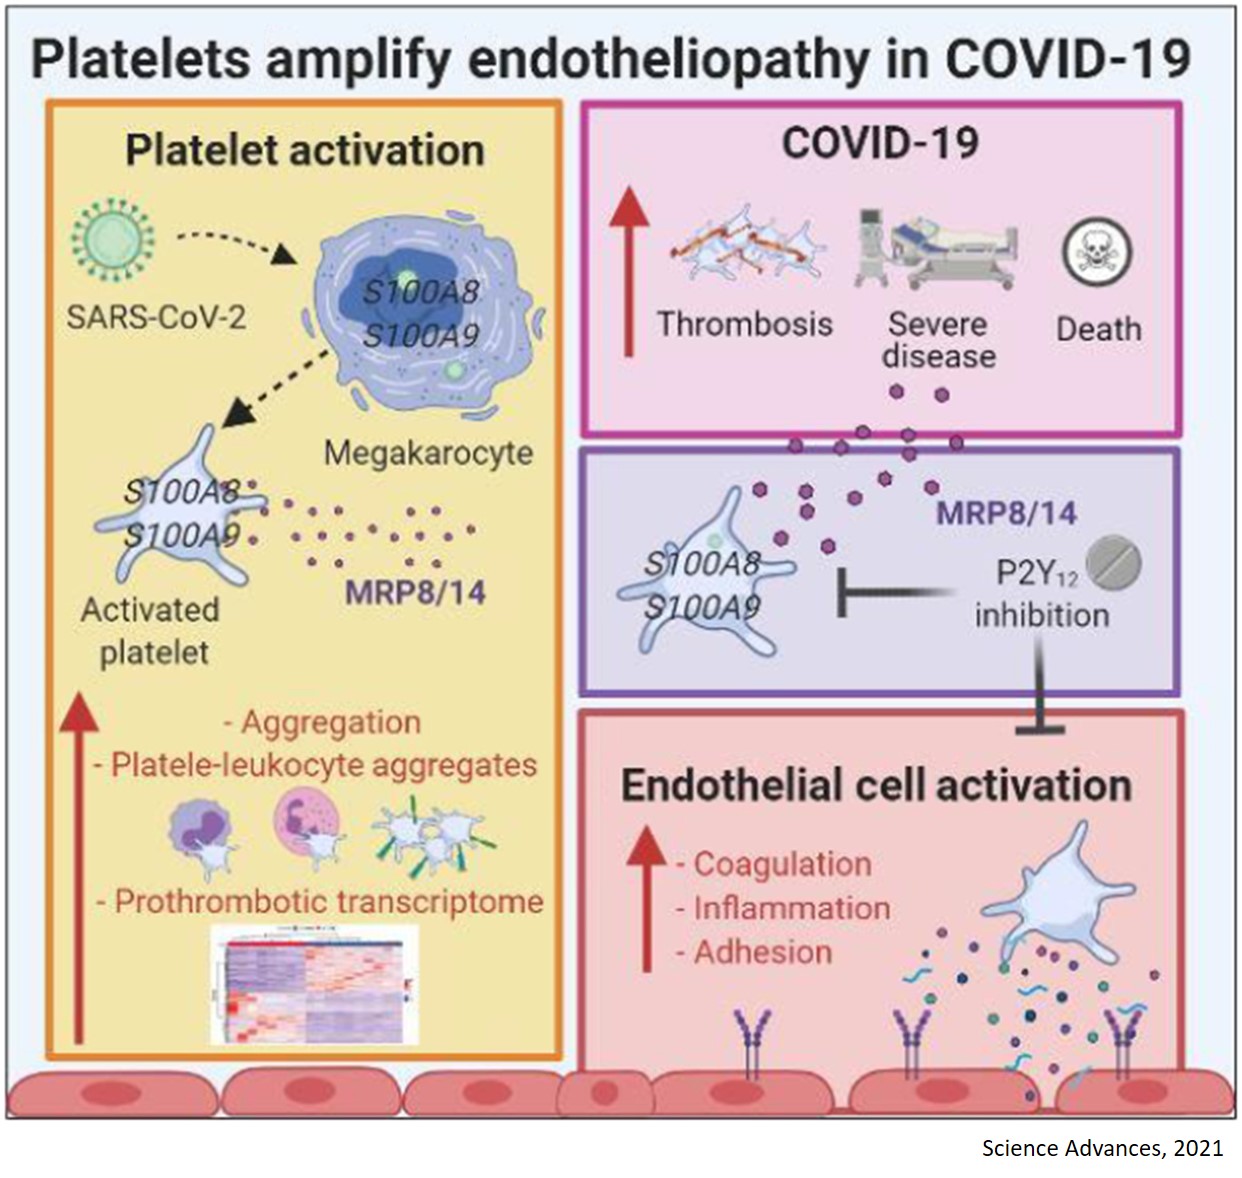 Platelets amplify endotheliopathy in COVID-19